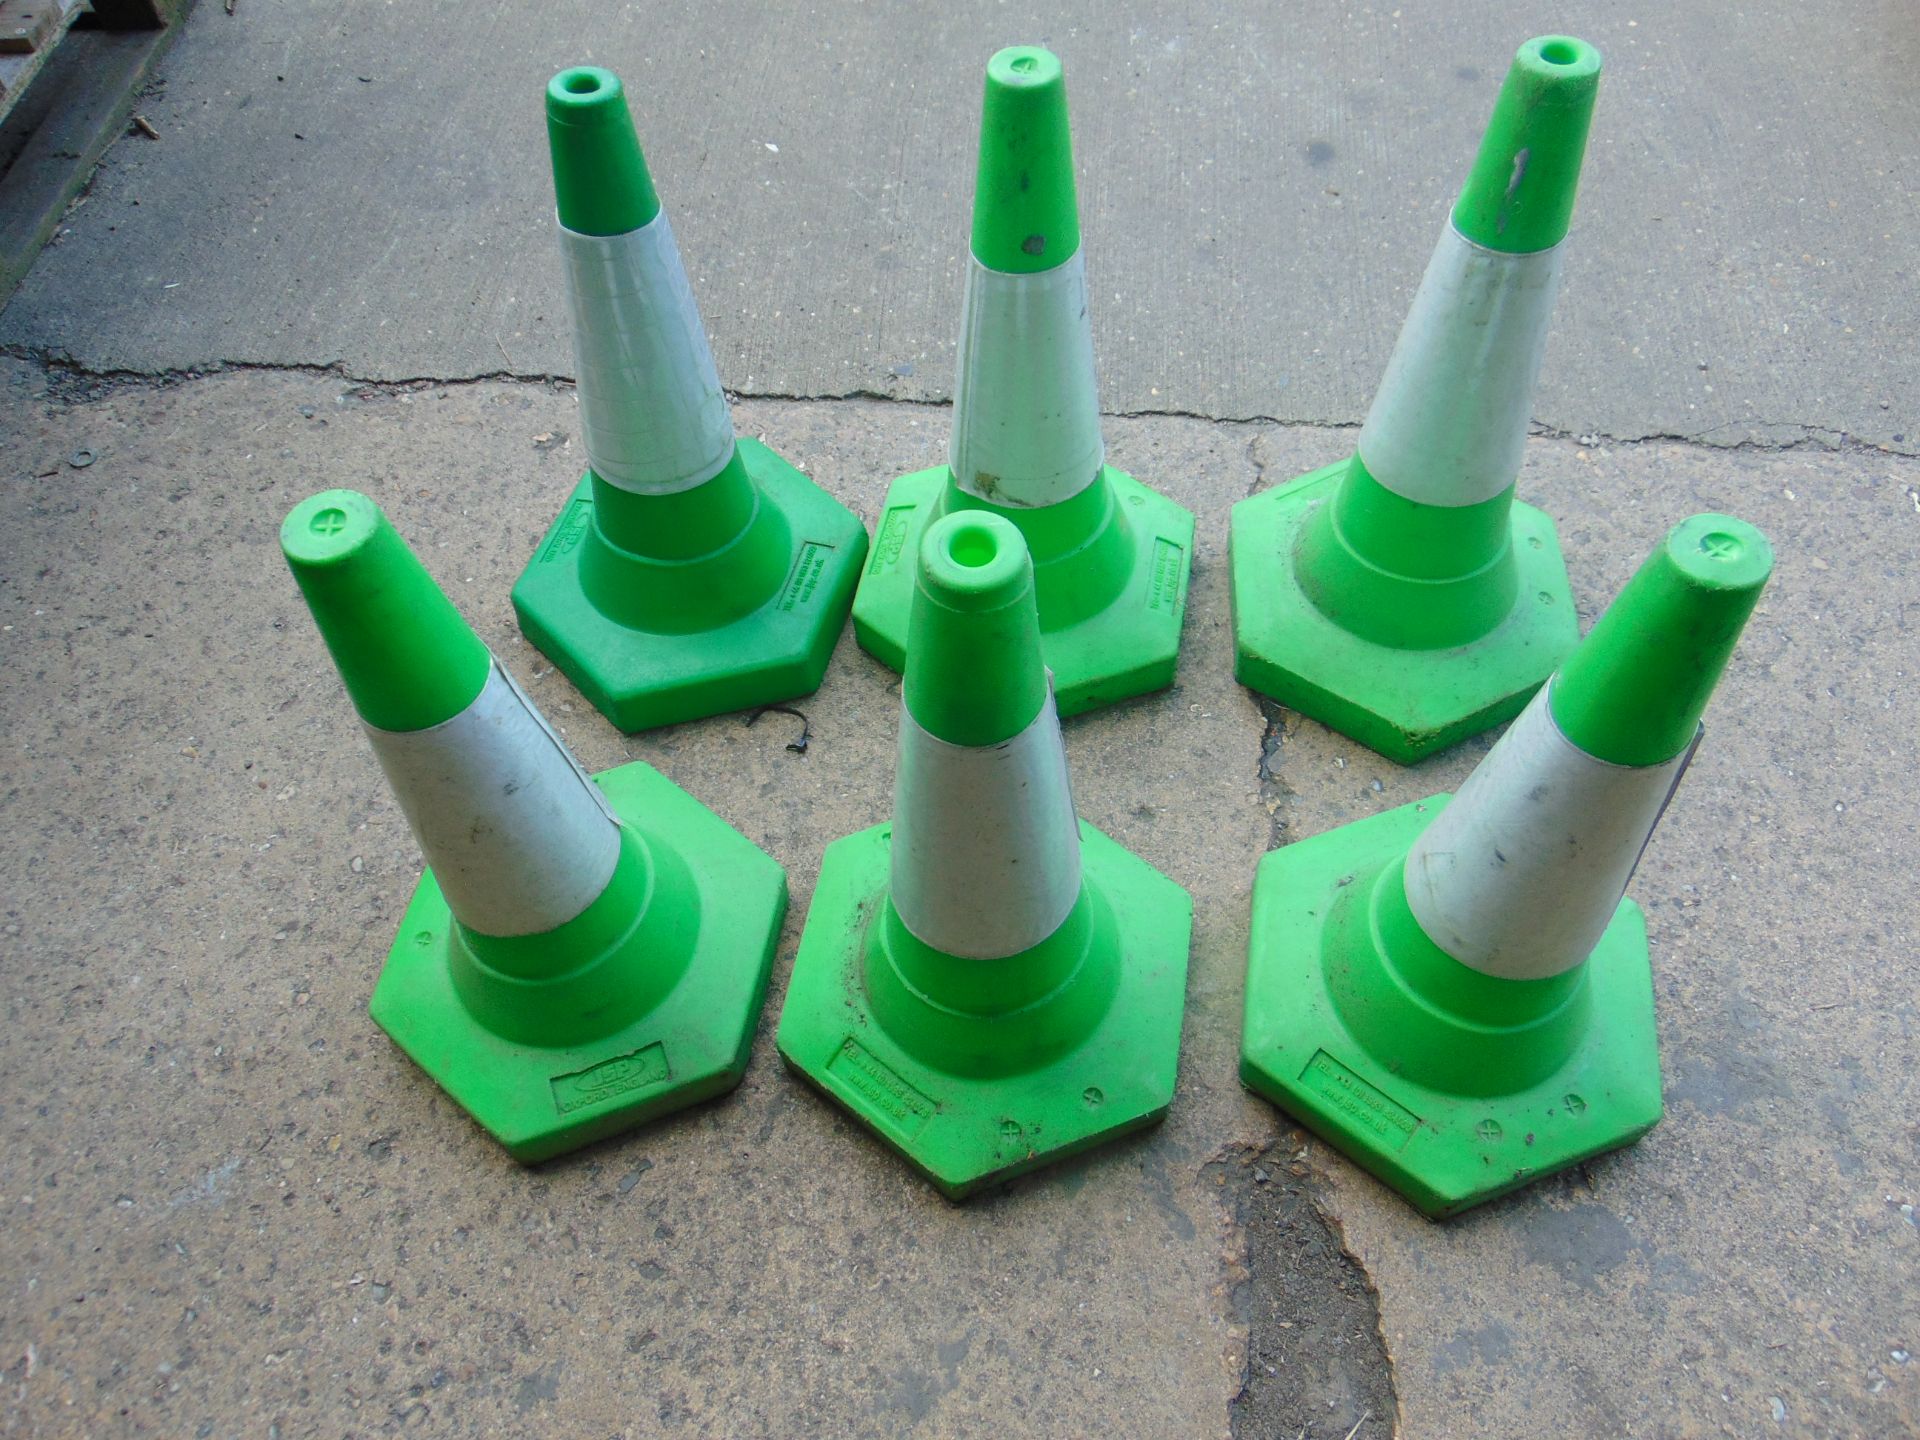 6 x Green Traffic Cones - Image 2 of 3